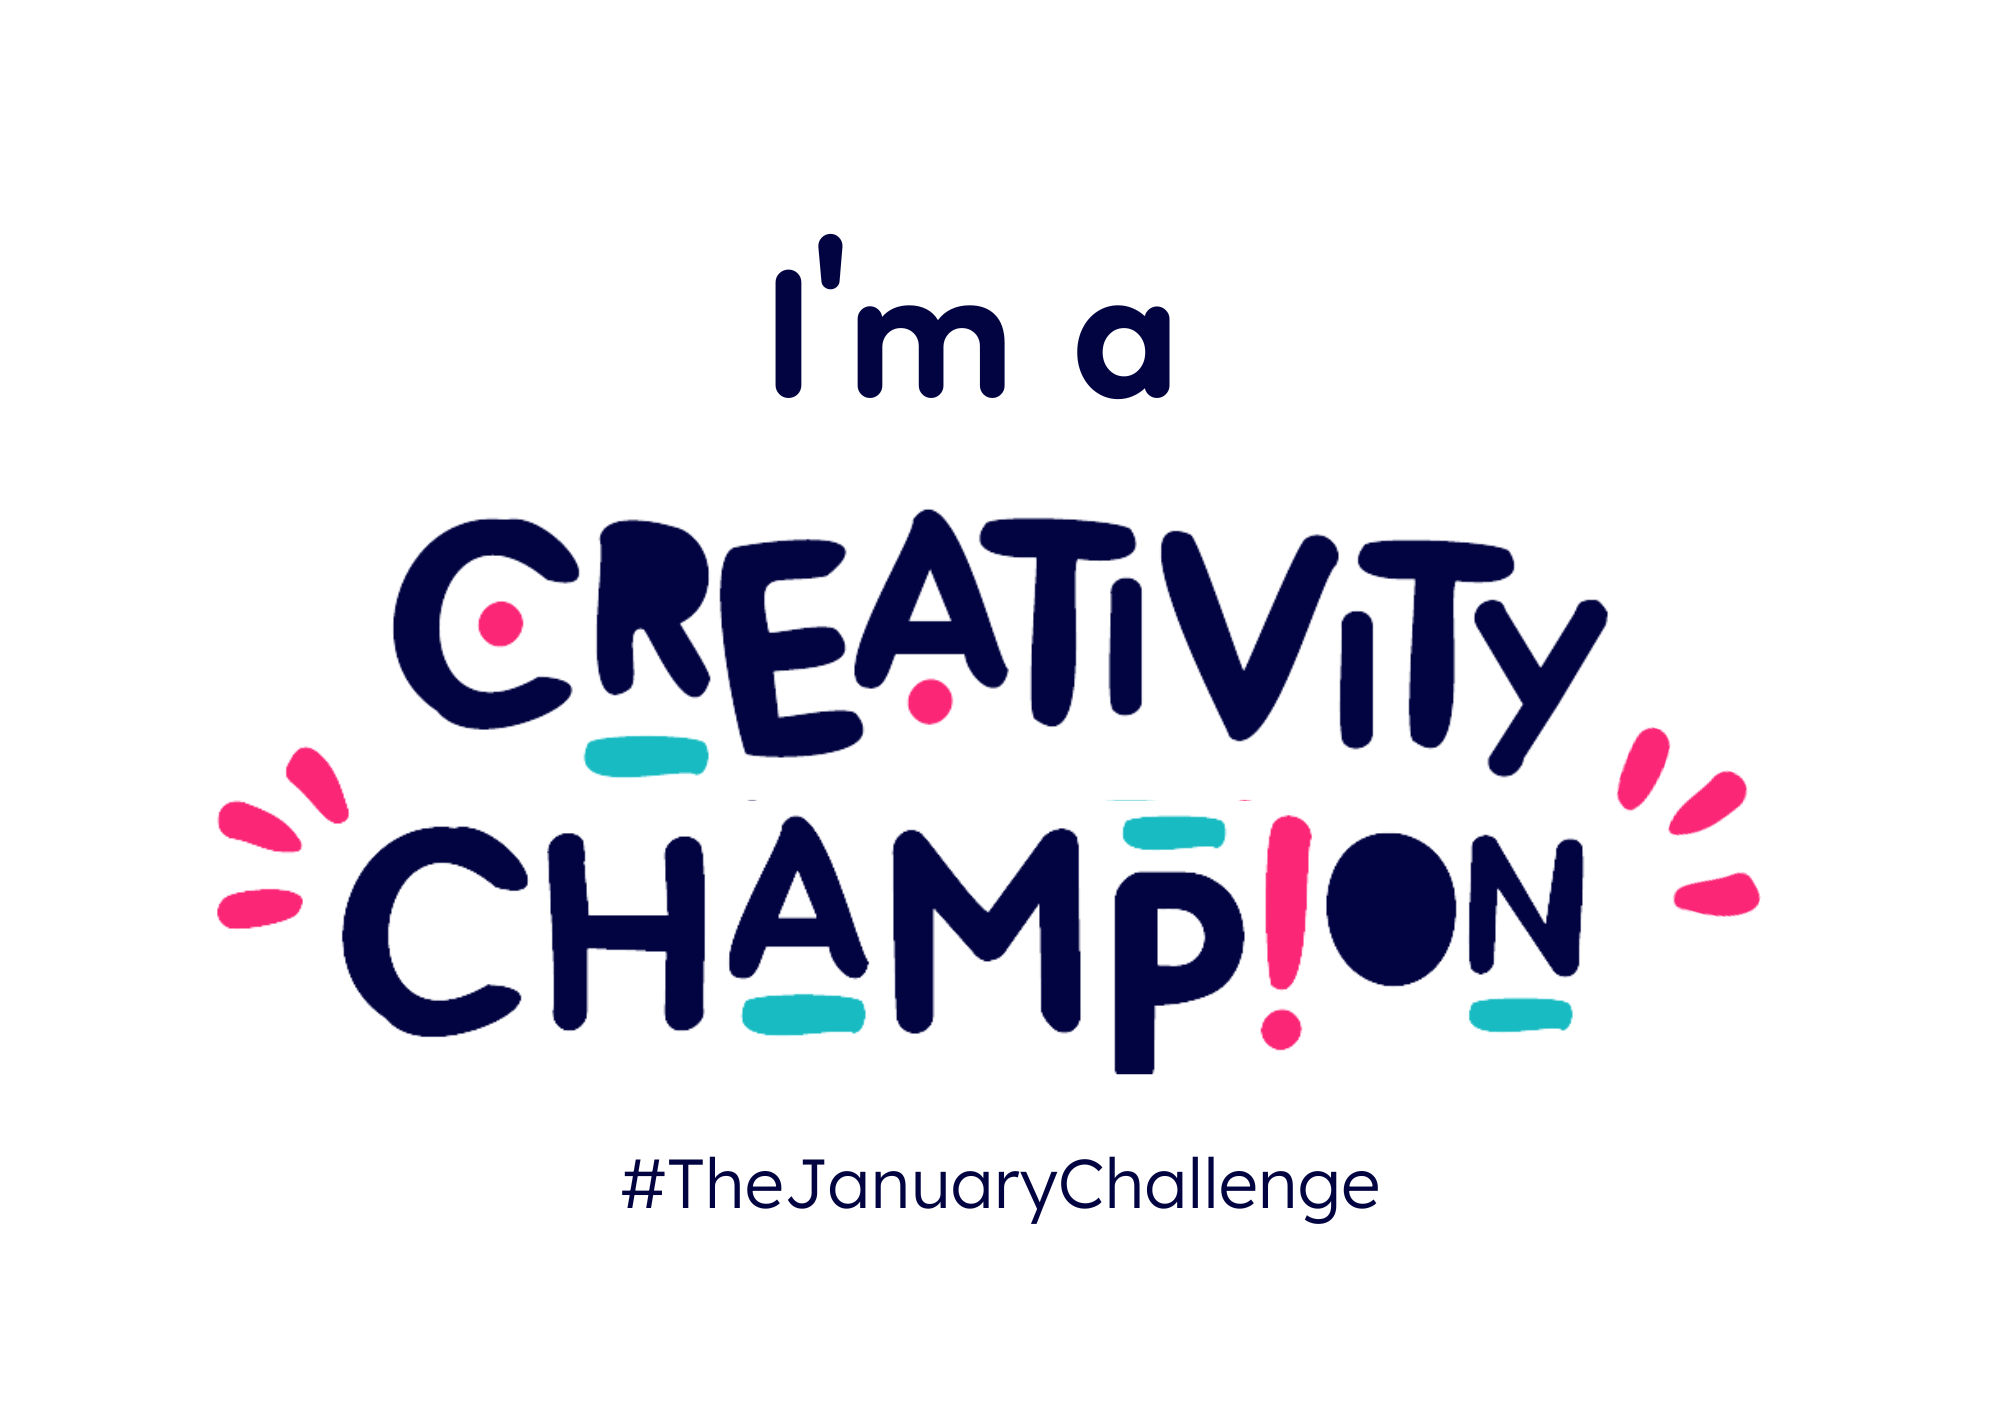 A poster that you can click and print that says 'I'm a Creativity Champion' #TheJanuaryChallenge